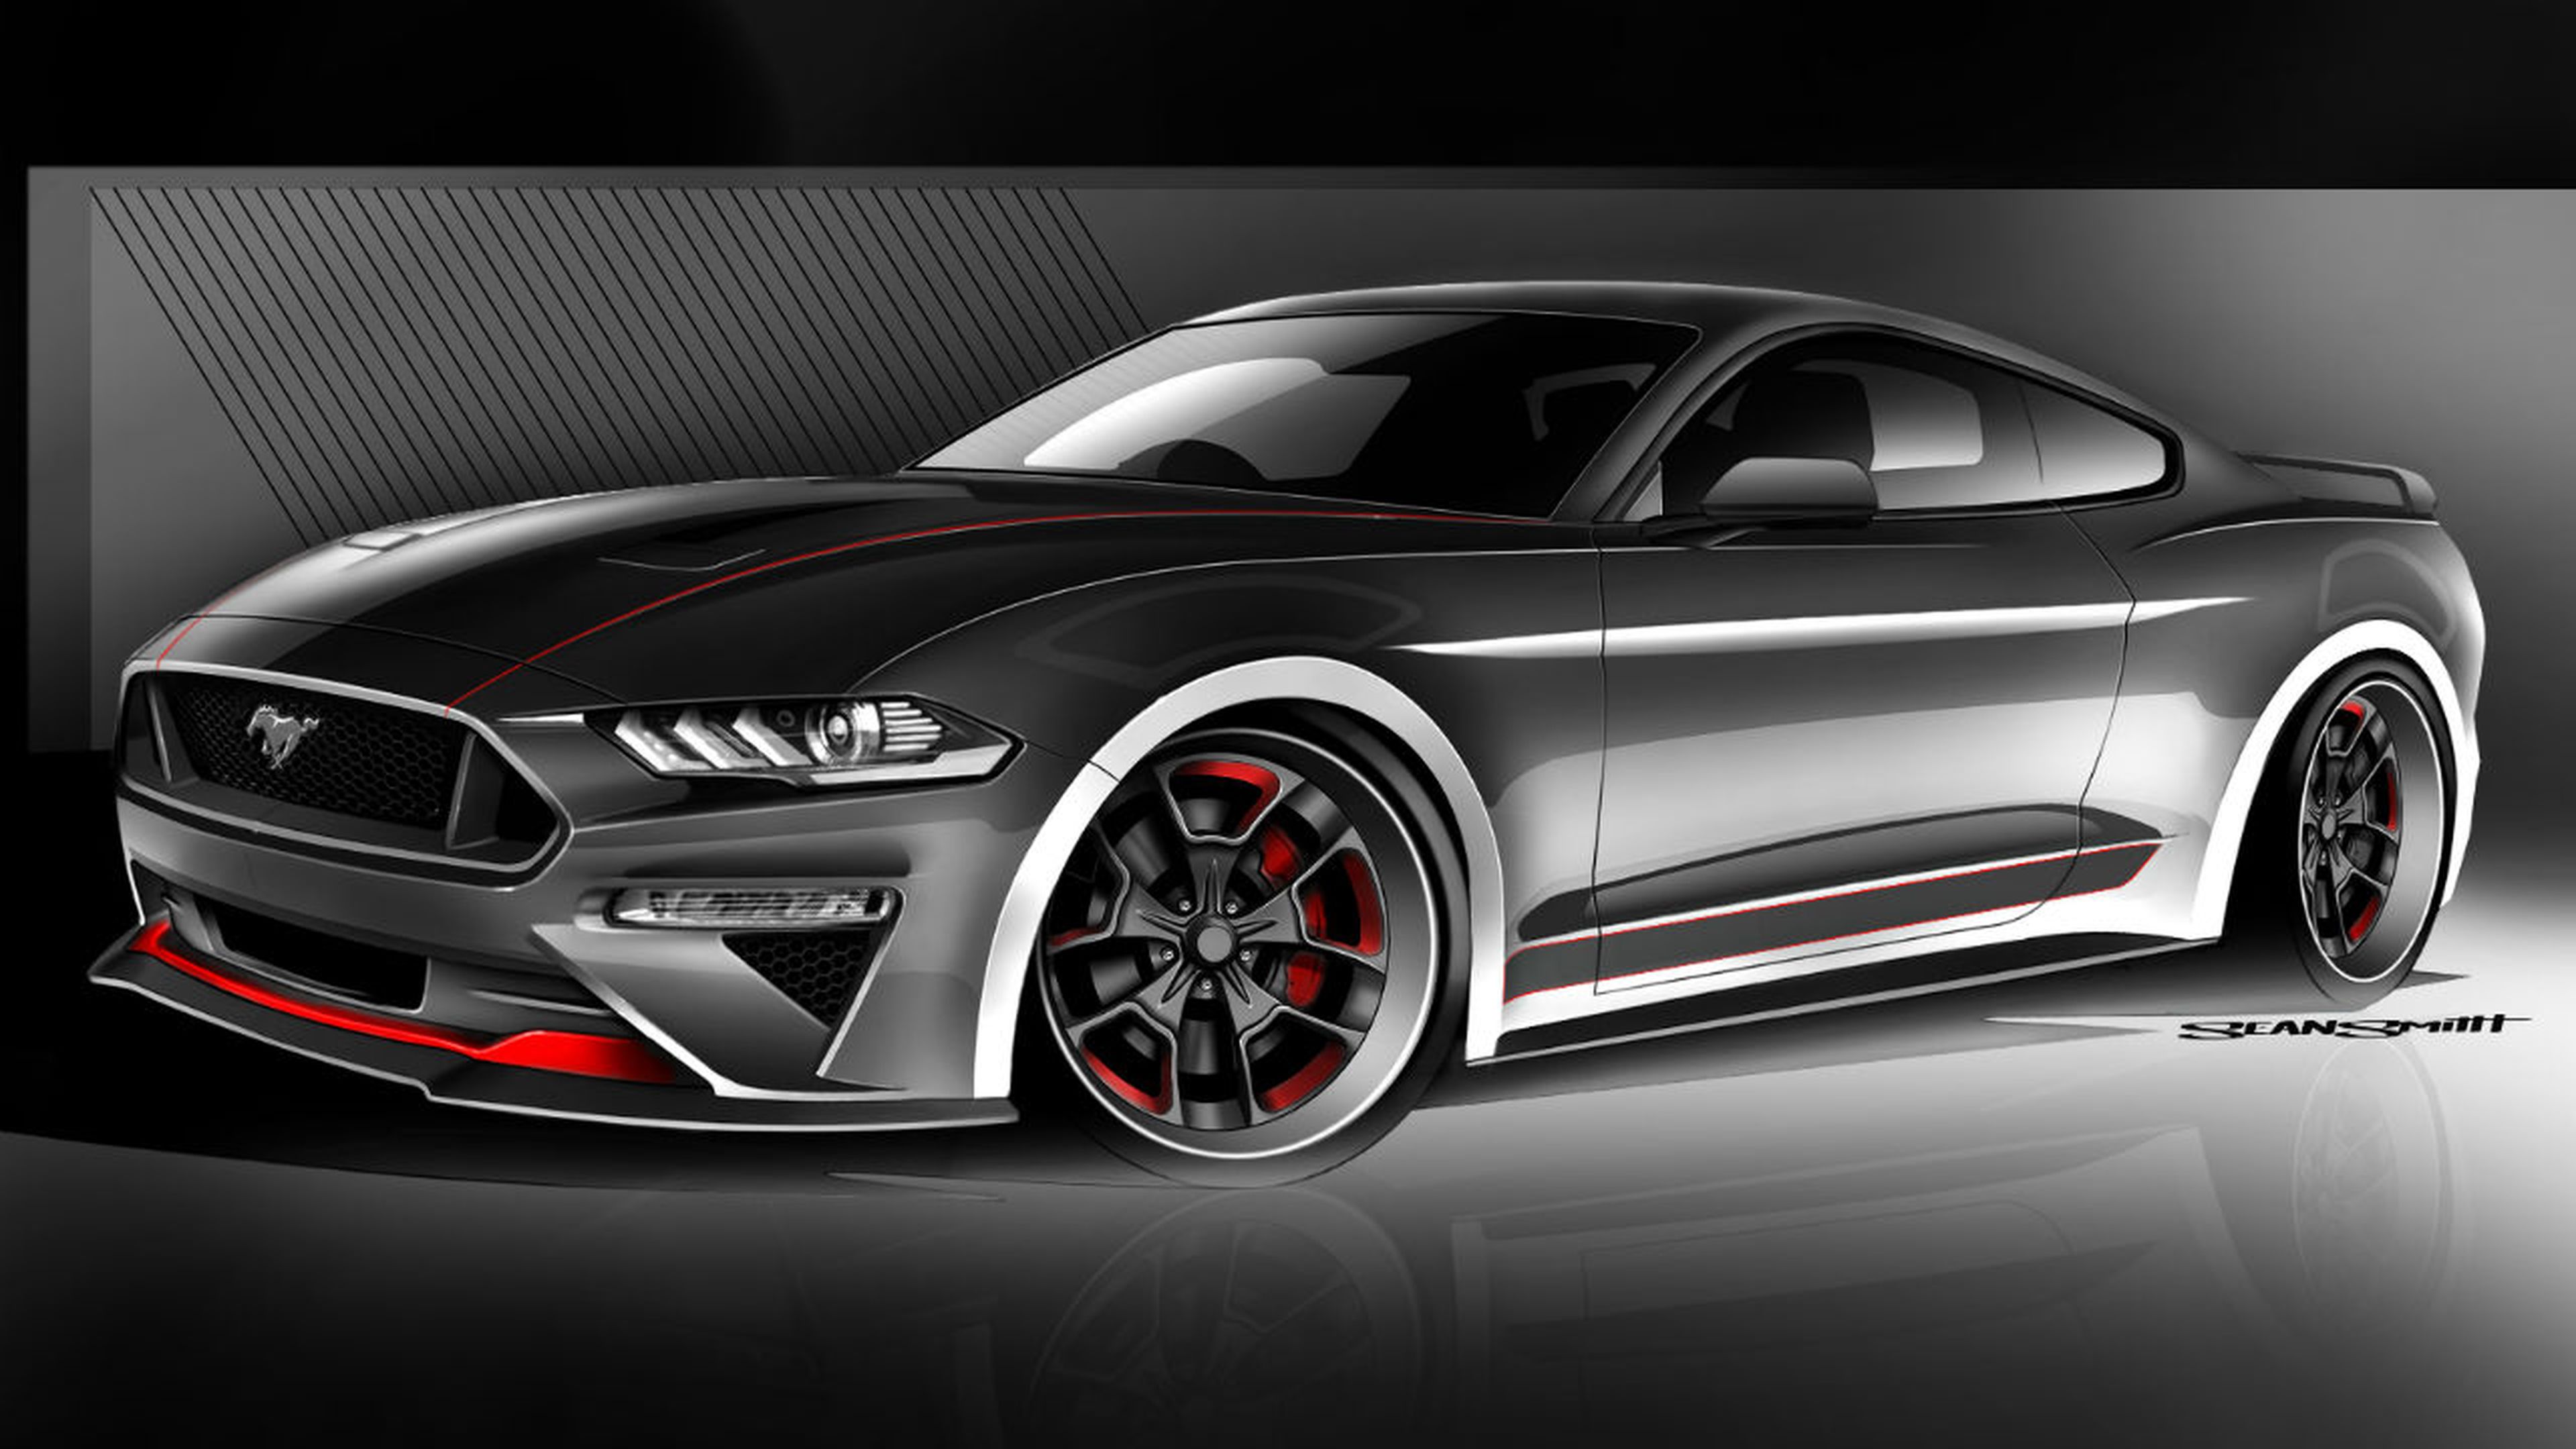 Ford Mustang CGS